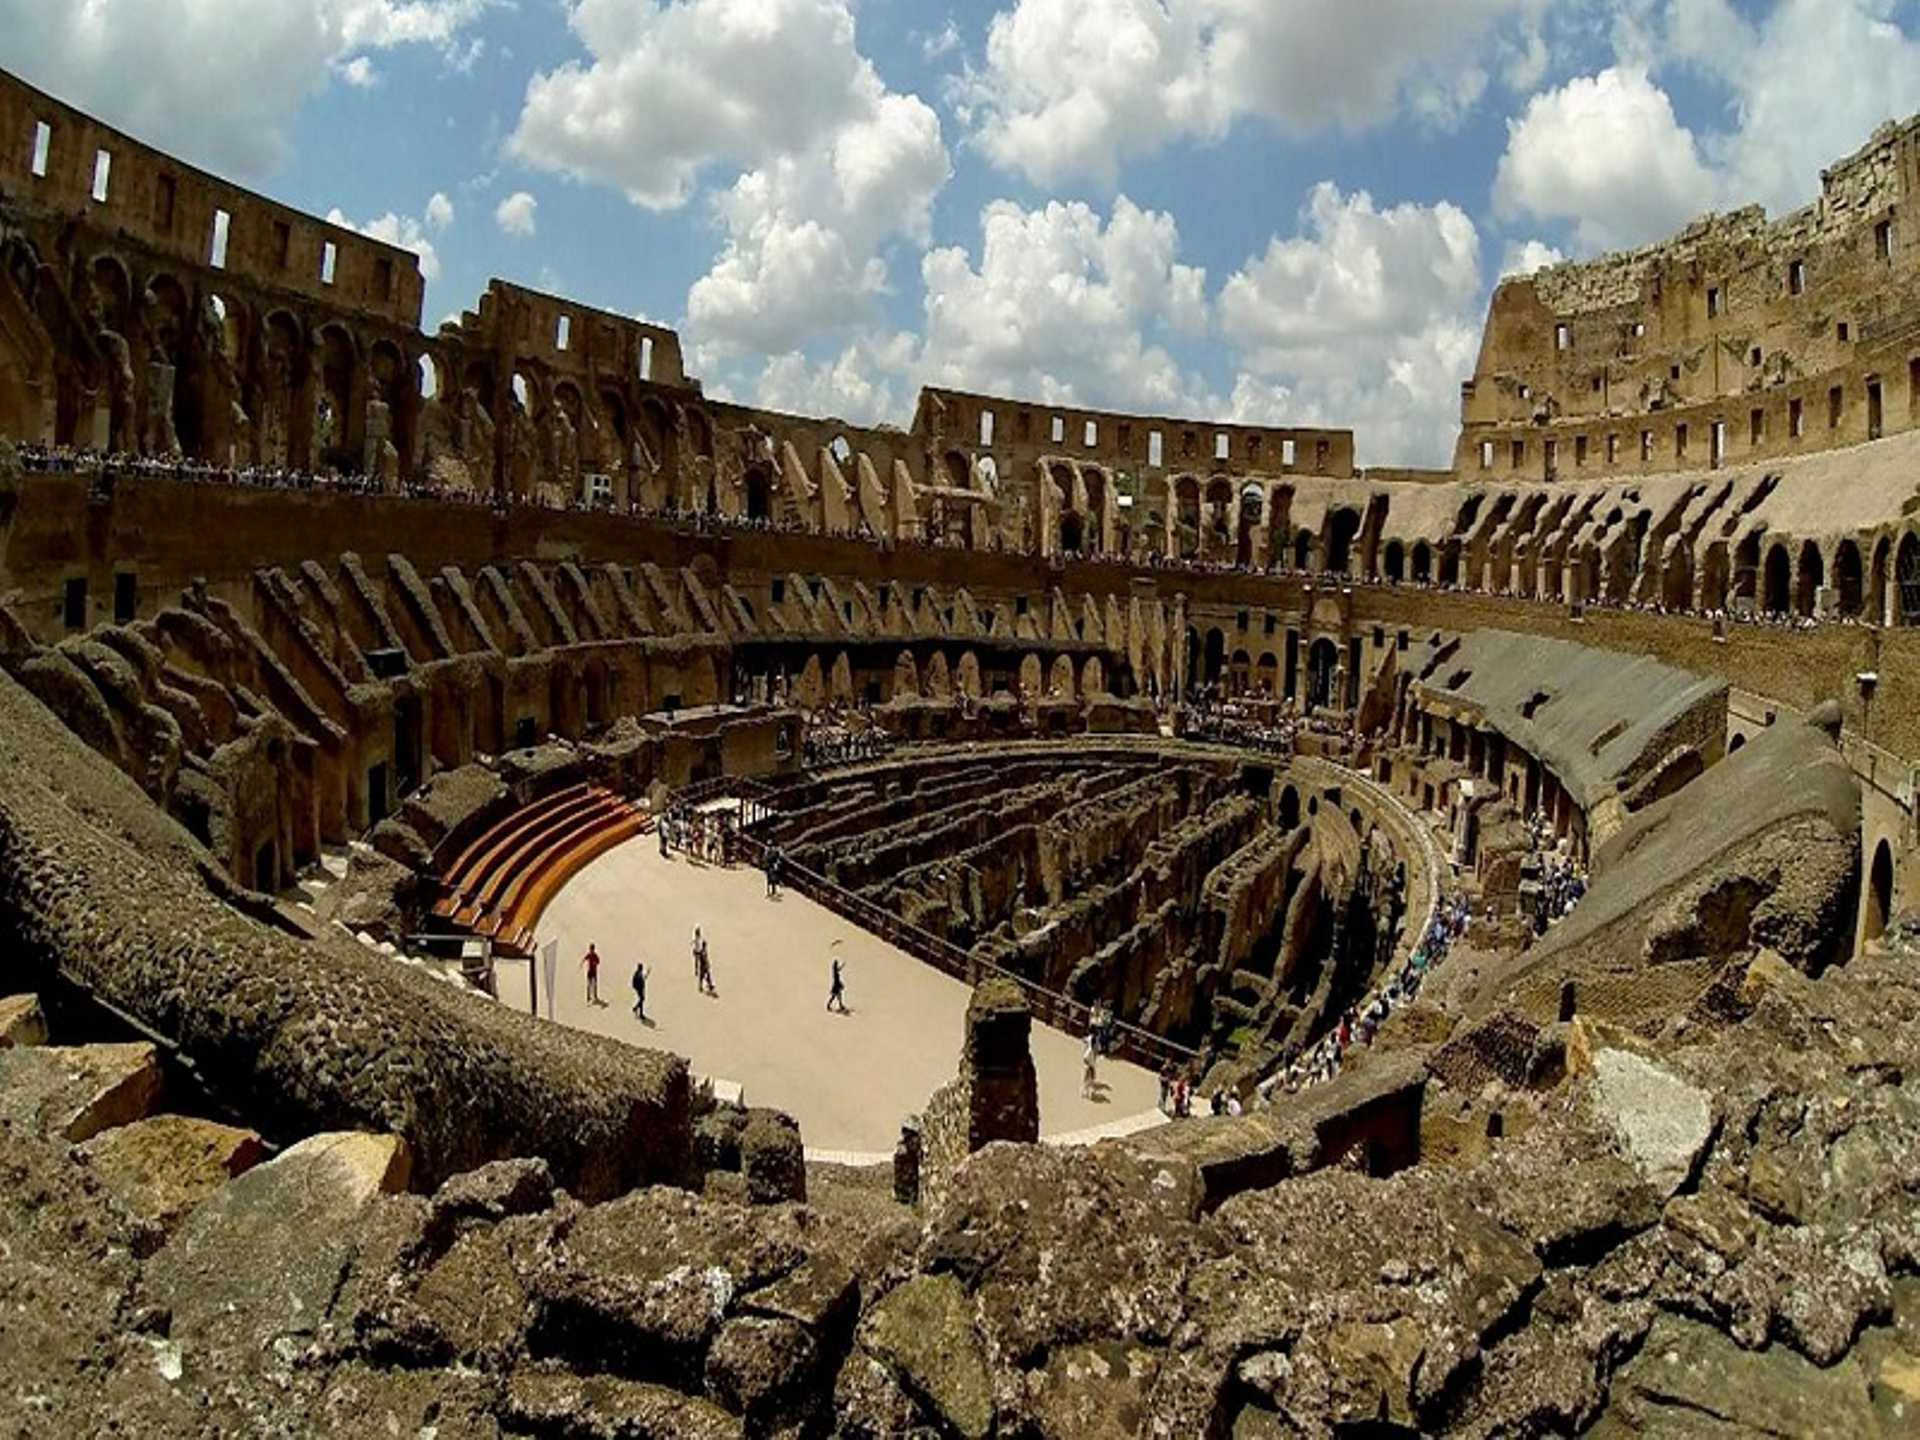 Skip the Line Colosseum & Roman Forum Tour with Guide